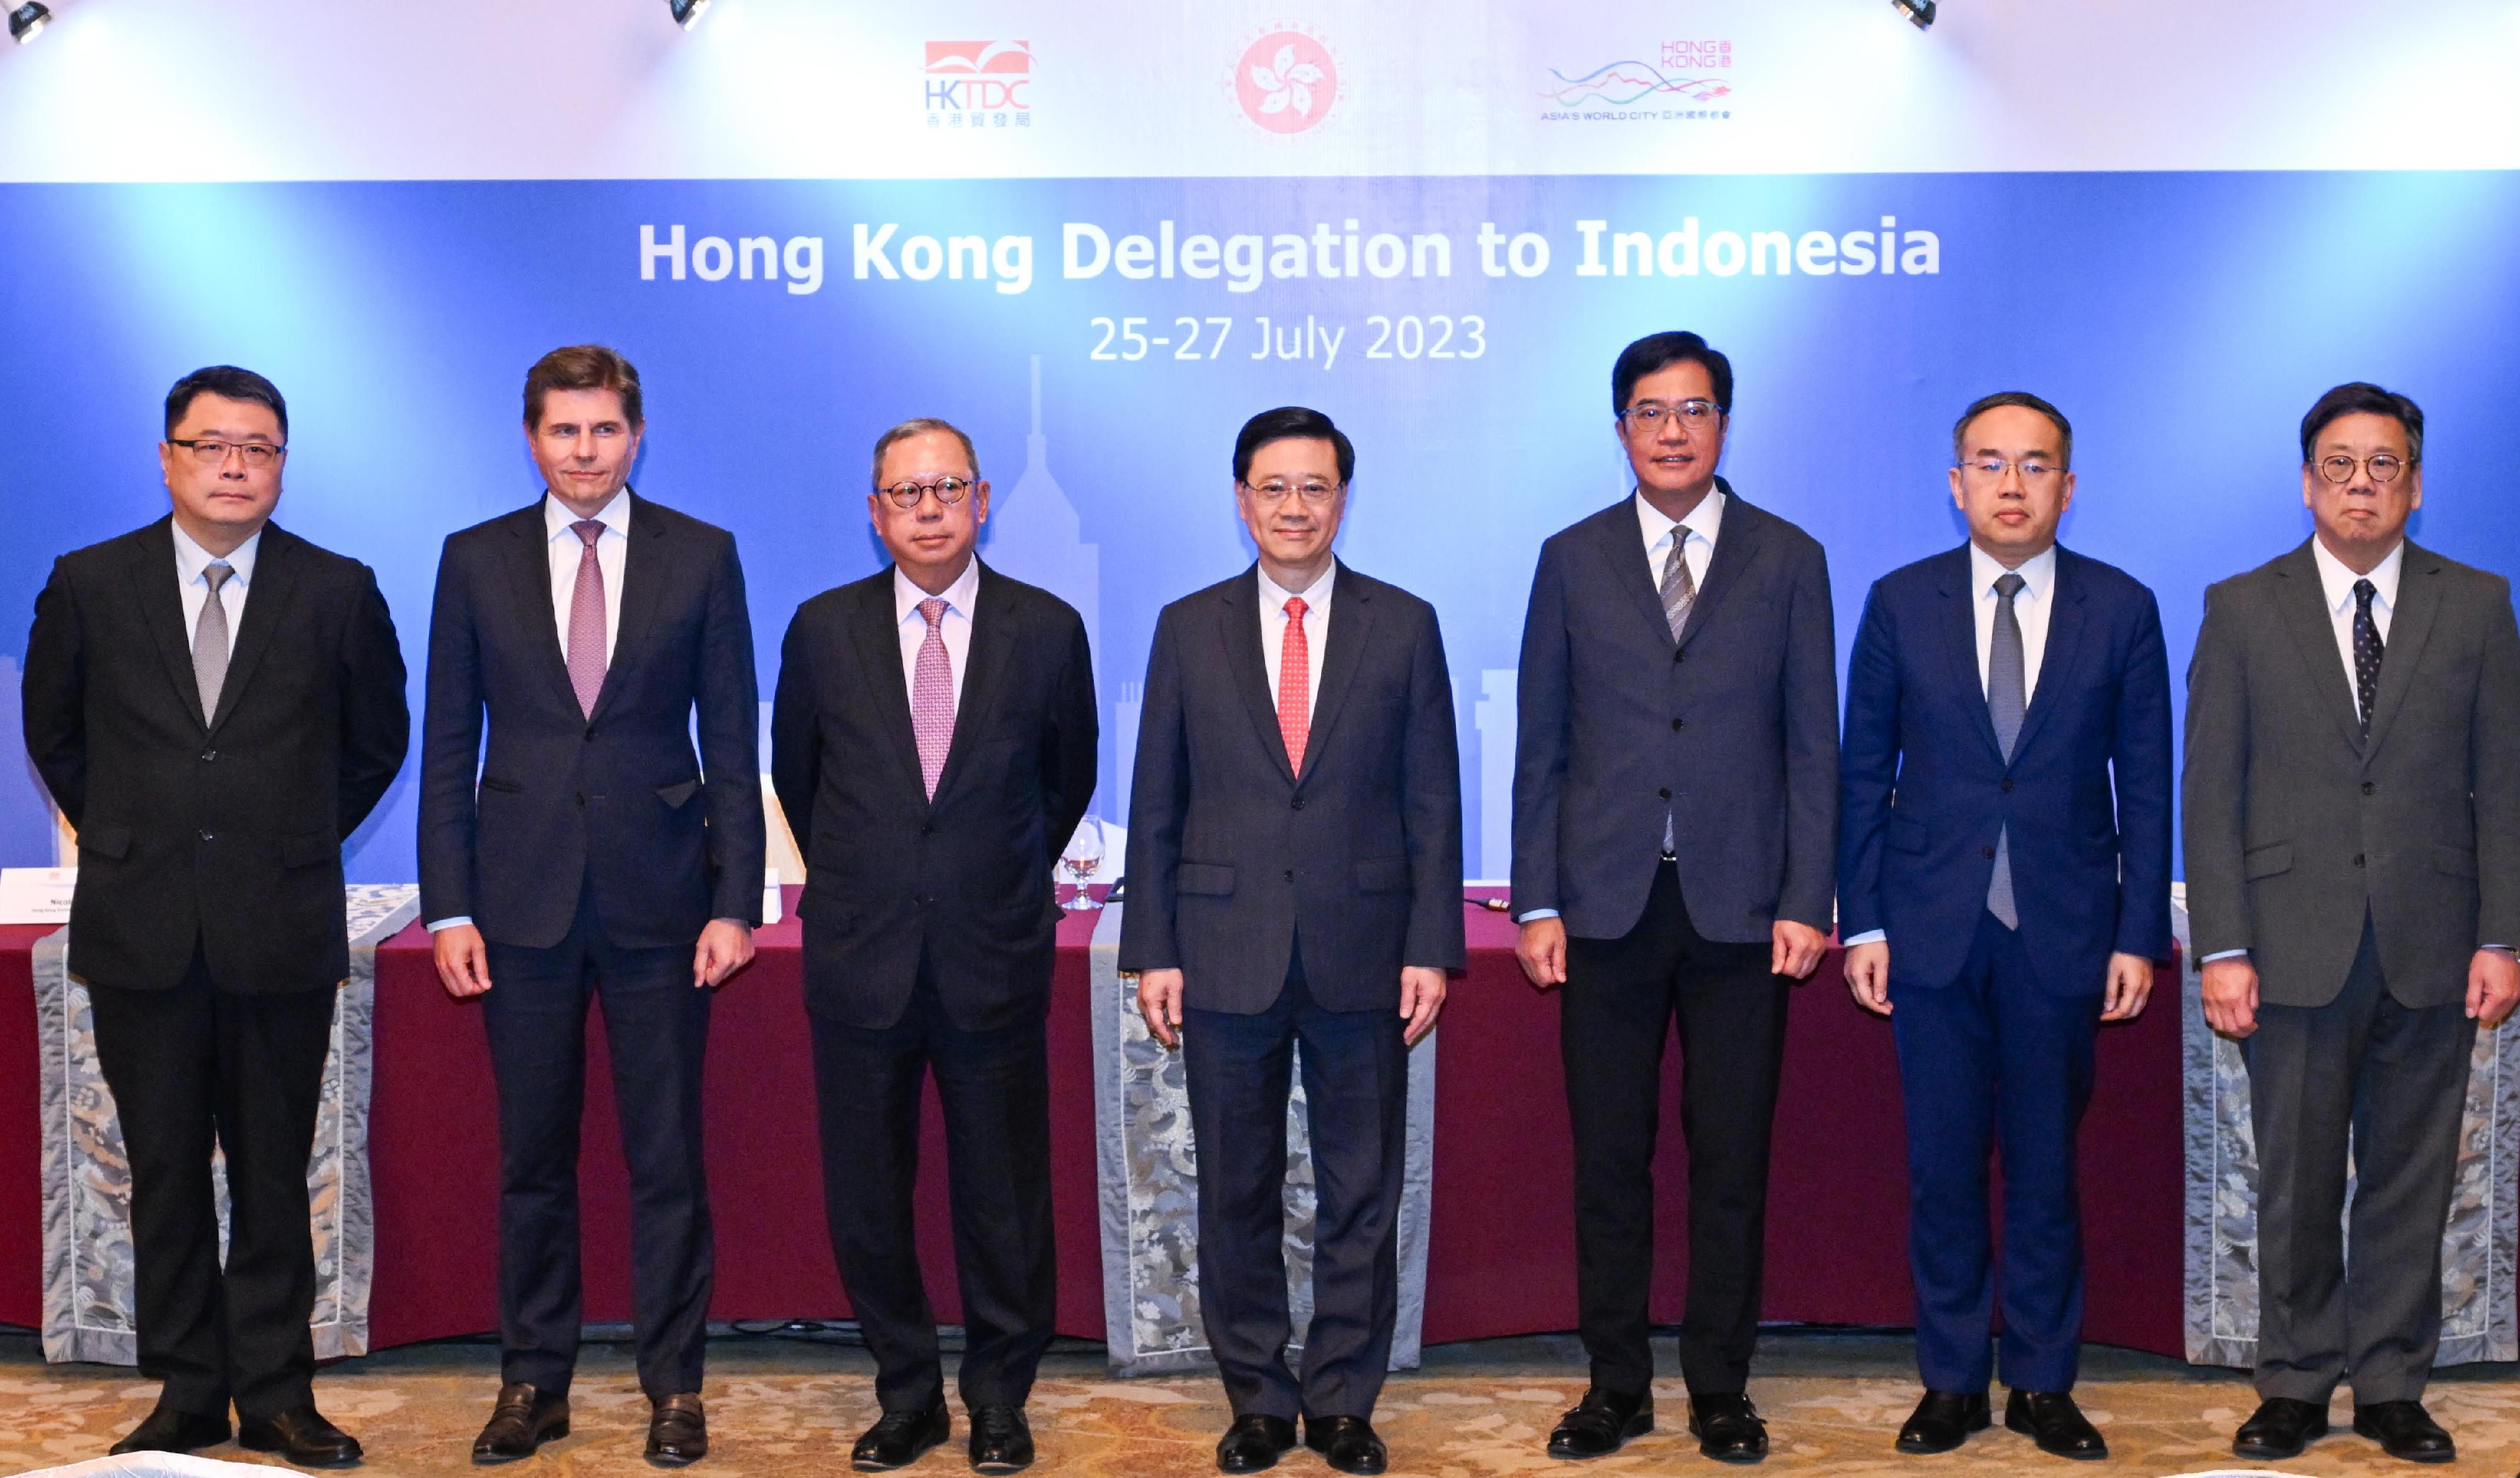 The Chief Executive, Mr John Lee (centre), together with the Chairman of the Hong Kong Trade Development Council, Dr Peter Lam (third left); the Deputy Financial Secretary, Mr Michael Wong (third right); the Secretary for Financial Services and the Treasury, Mr Christopher Hui (second right); the Secretary for Commerce and Economic Development, Mr Algernon Yau (first right); the Chief Executive Officer of the Hong Kong Exchanges and Clearing Limited, Mr Nicolas Aguzin (second left); and the Chairman of the Hong Kong Science and Technology Parks Corporation and Chairman of the Federation of Hong Kong Industries, Dr Sunny Chai (first left), hosts a press conference in Jakarta, Indonesia, today (July 26).
